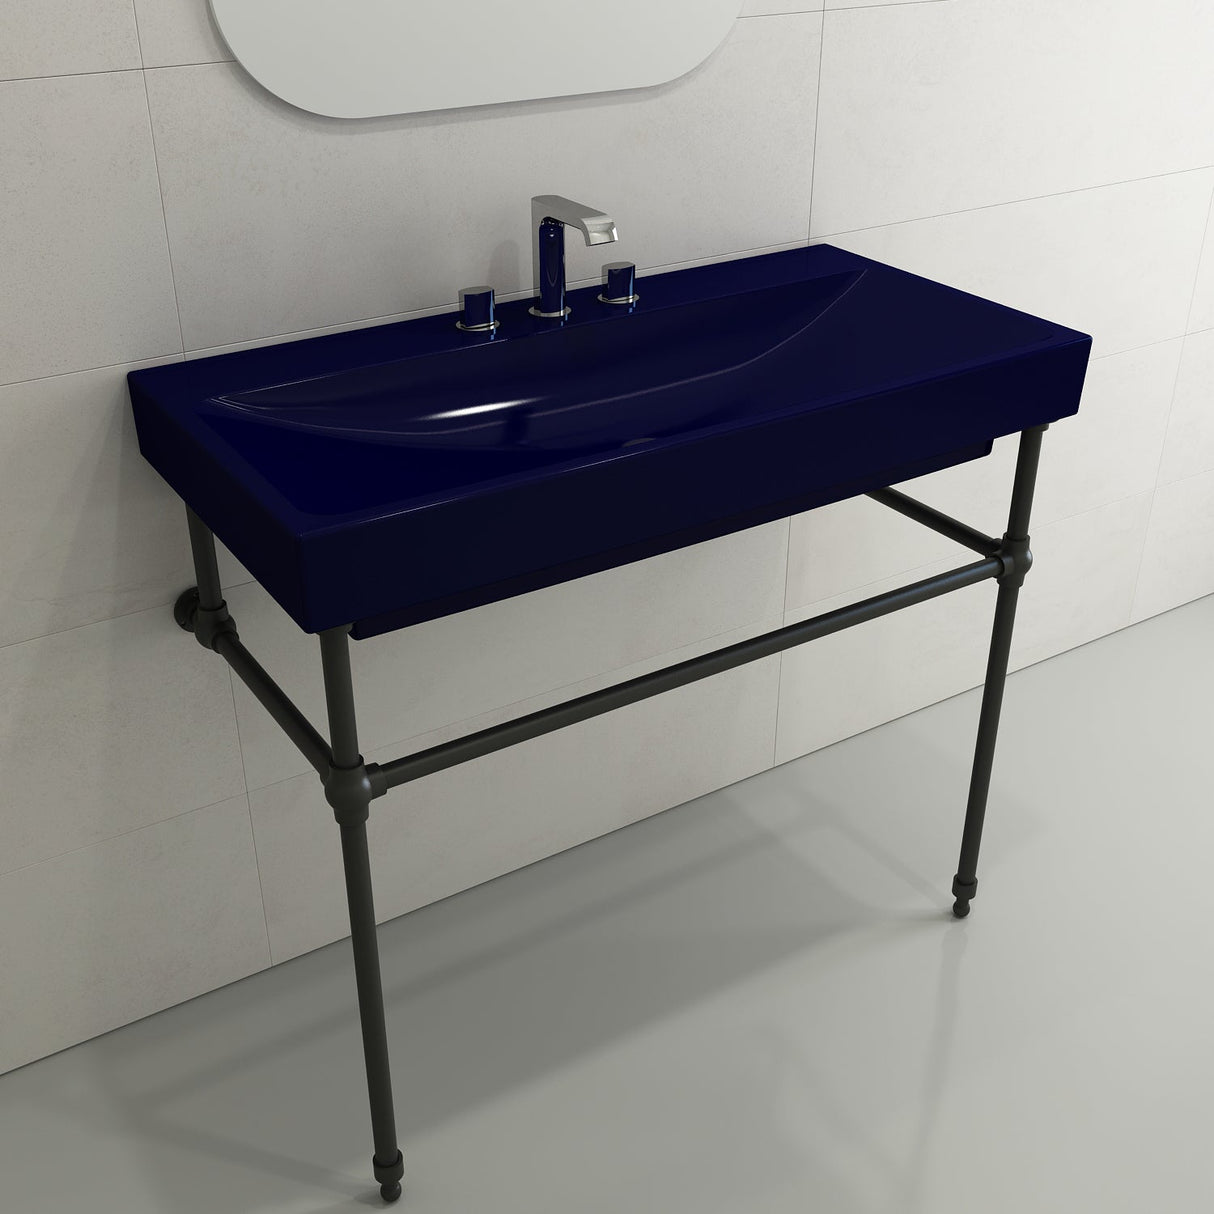 BOCCHI 1079-010-0127 Scala Arch Wall-Mounted Sink Fireclay 39.75 in. 3-Hole in Sapphire Blue